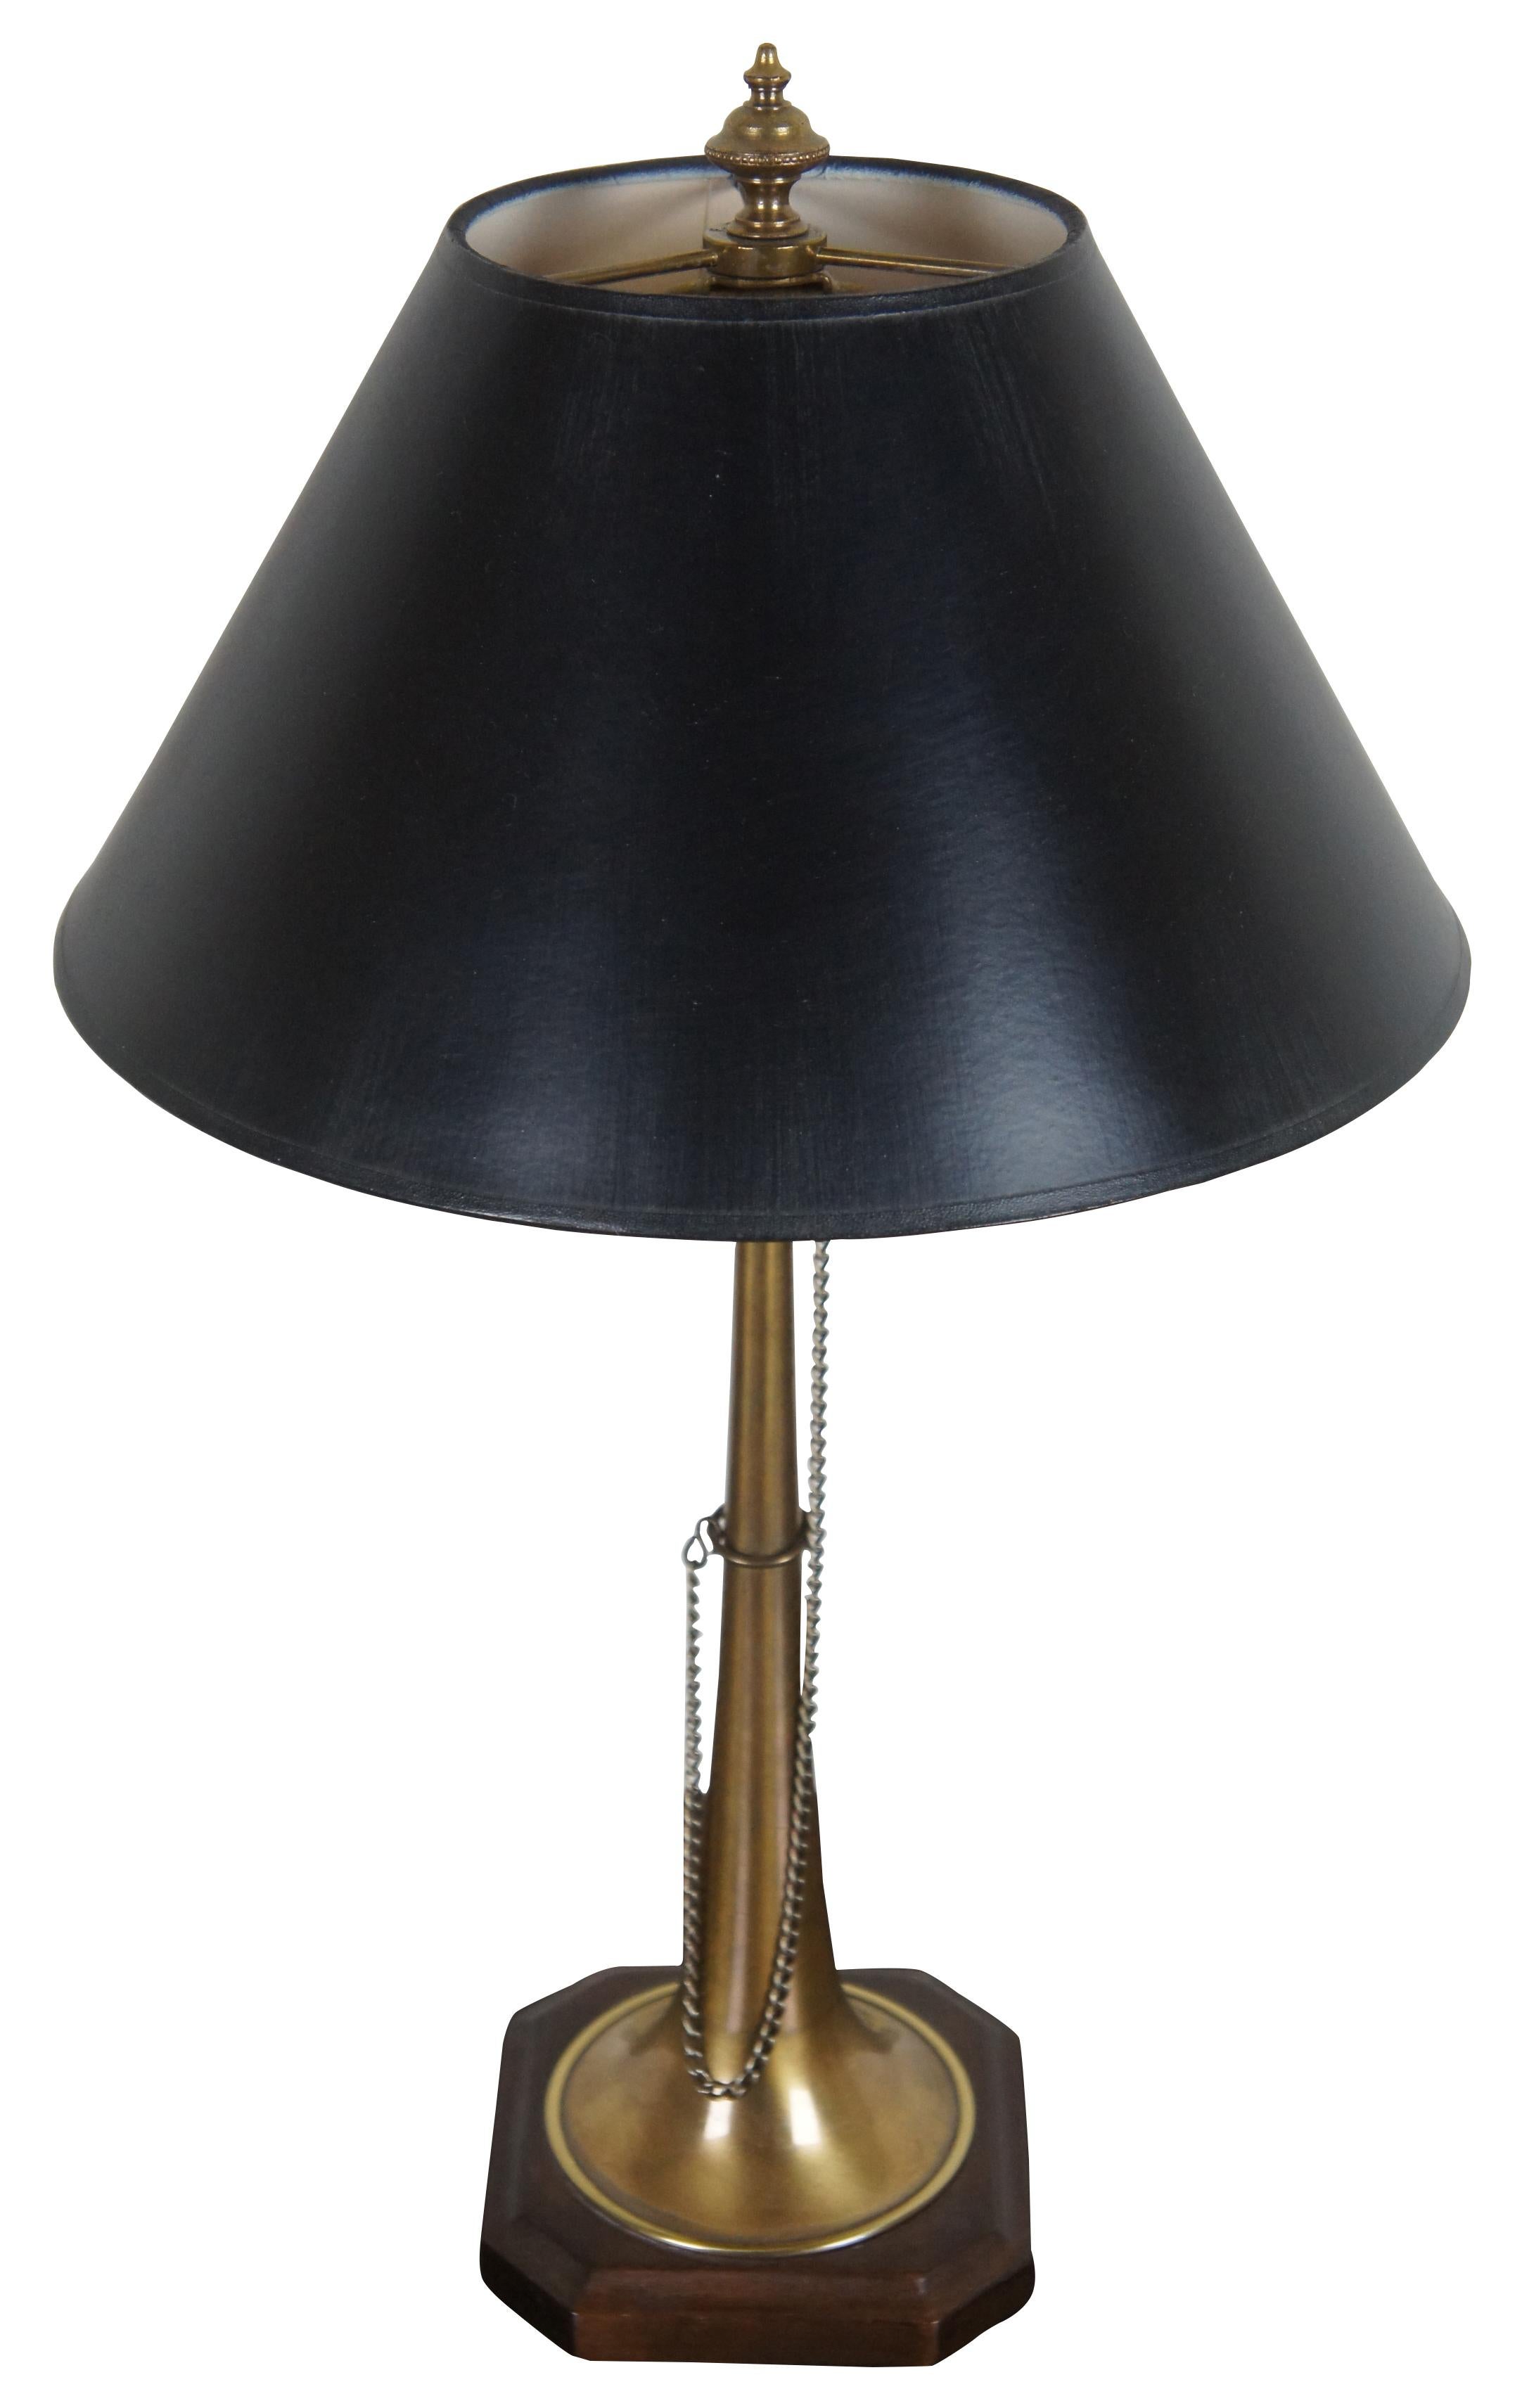 Vintage Frederick Cooper brass table lamp in the shape of a straight brass horn mounted on a wood base, with a black shade.

Measures: 5.5” x 5.5” x 16” / Shade - 12.25” x 6.25” / Height with shade – 22” (Width x Depth x Height/Diameter x Height).